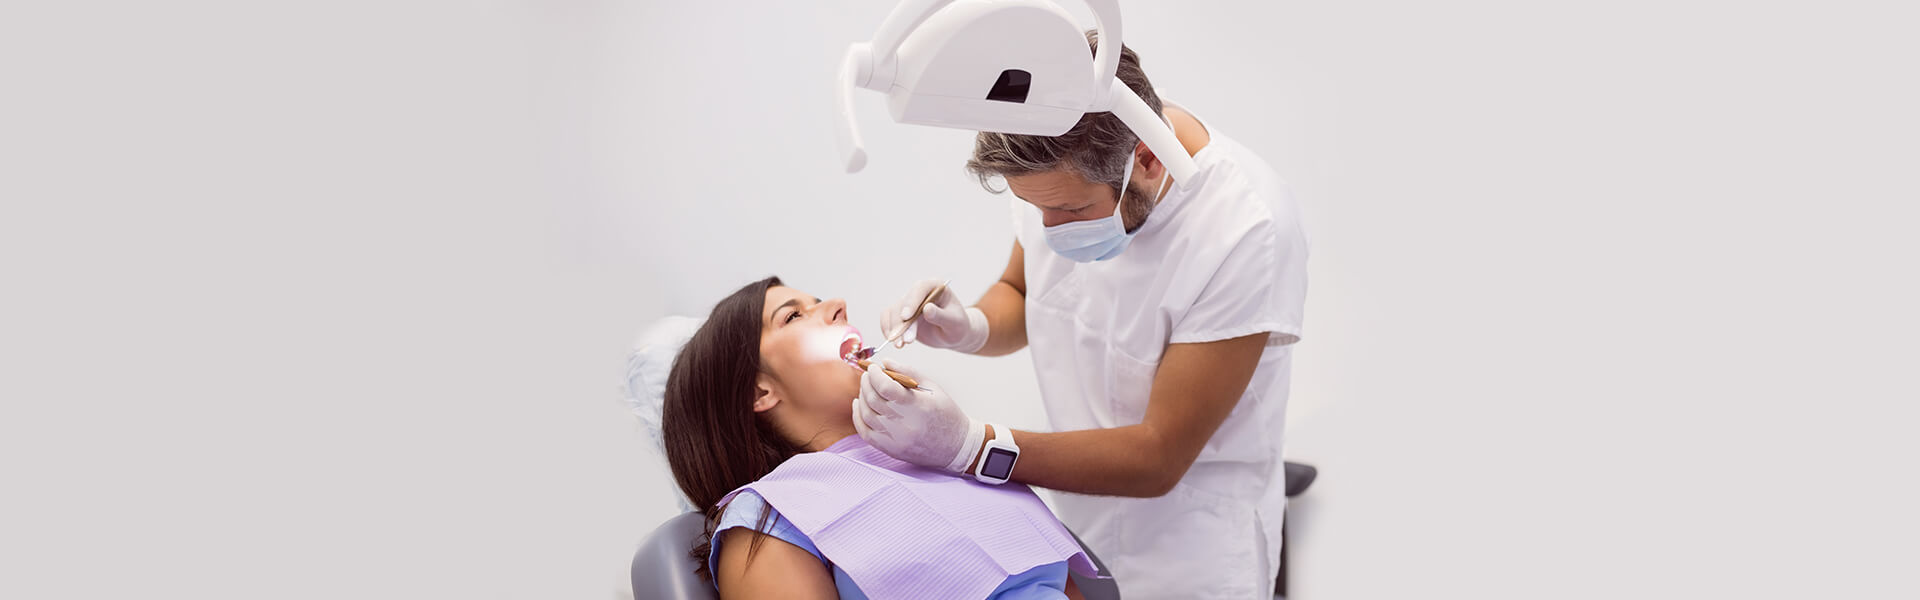 What is Tooth Extraction, and why is it Recommended?